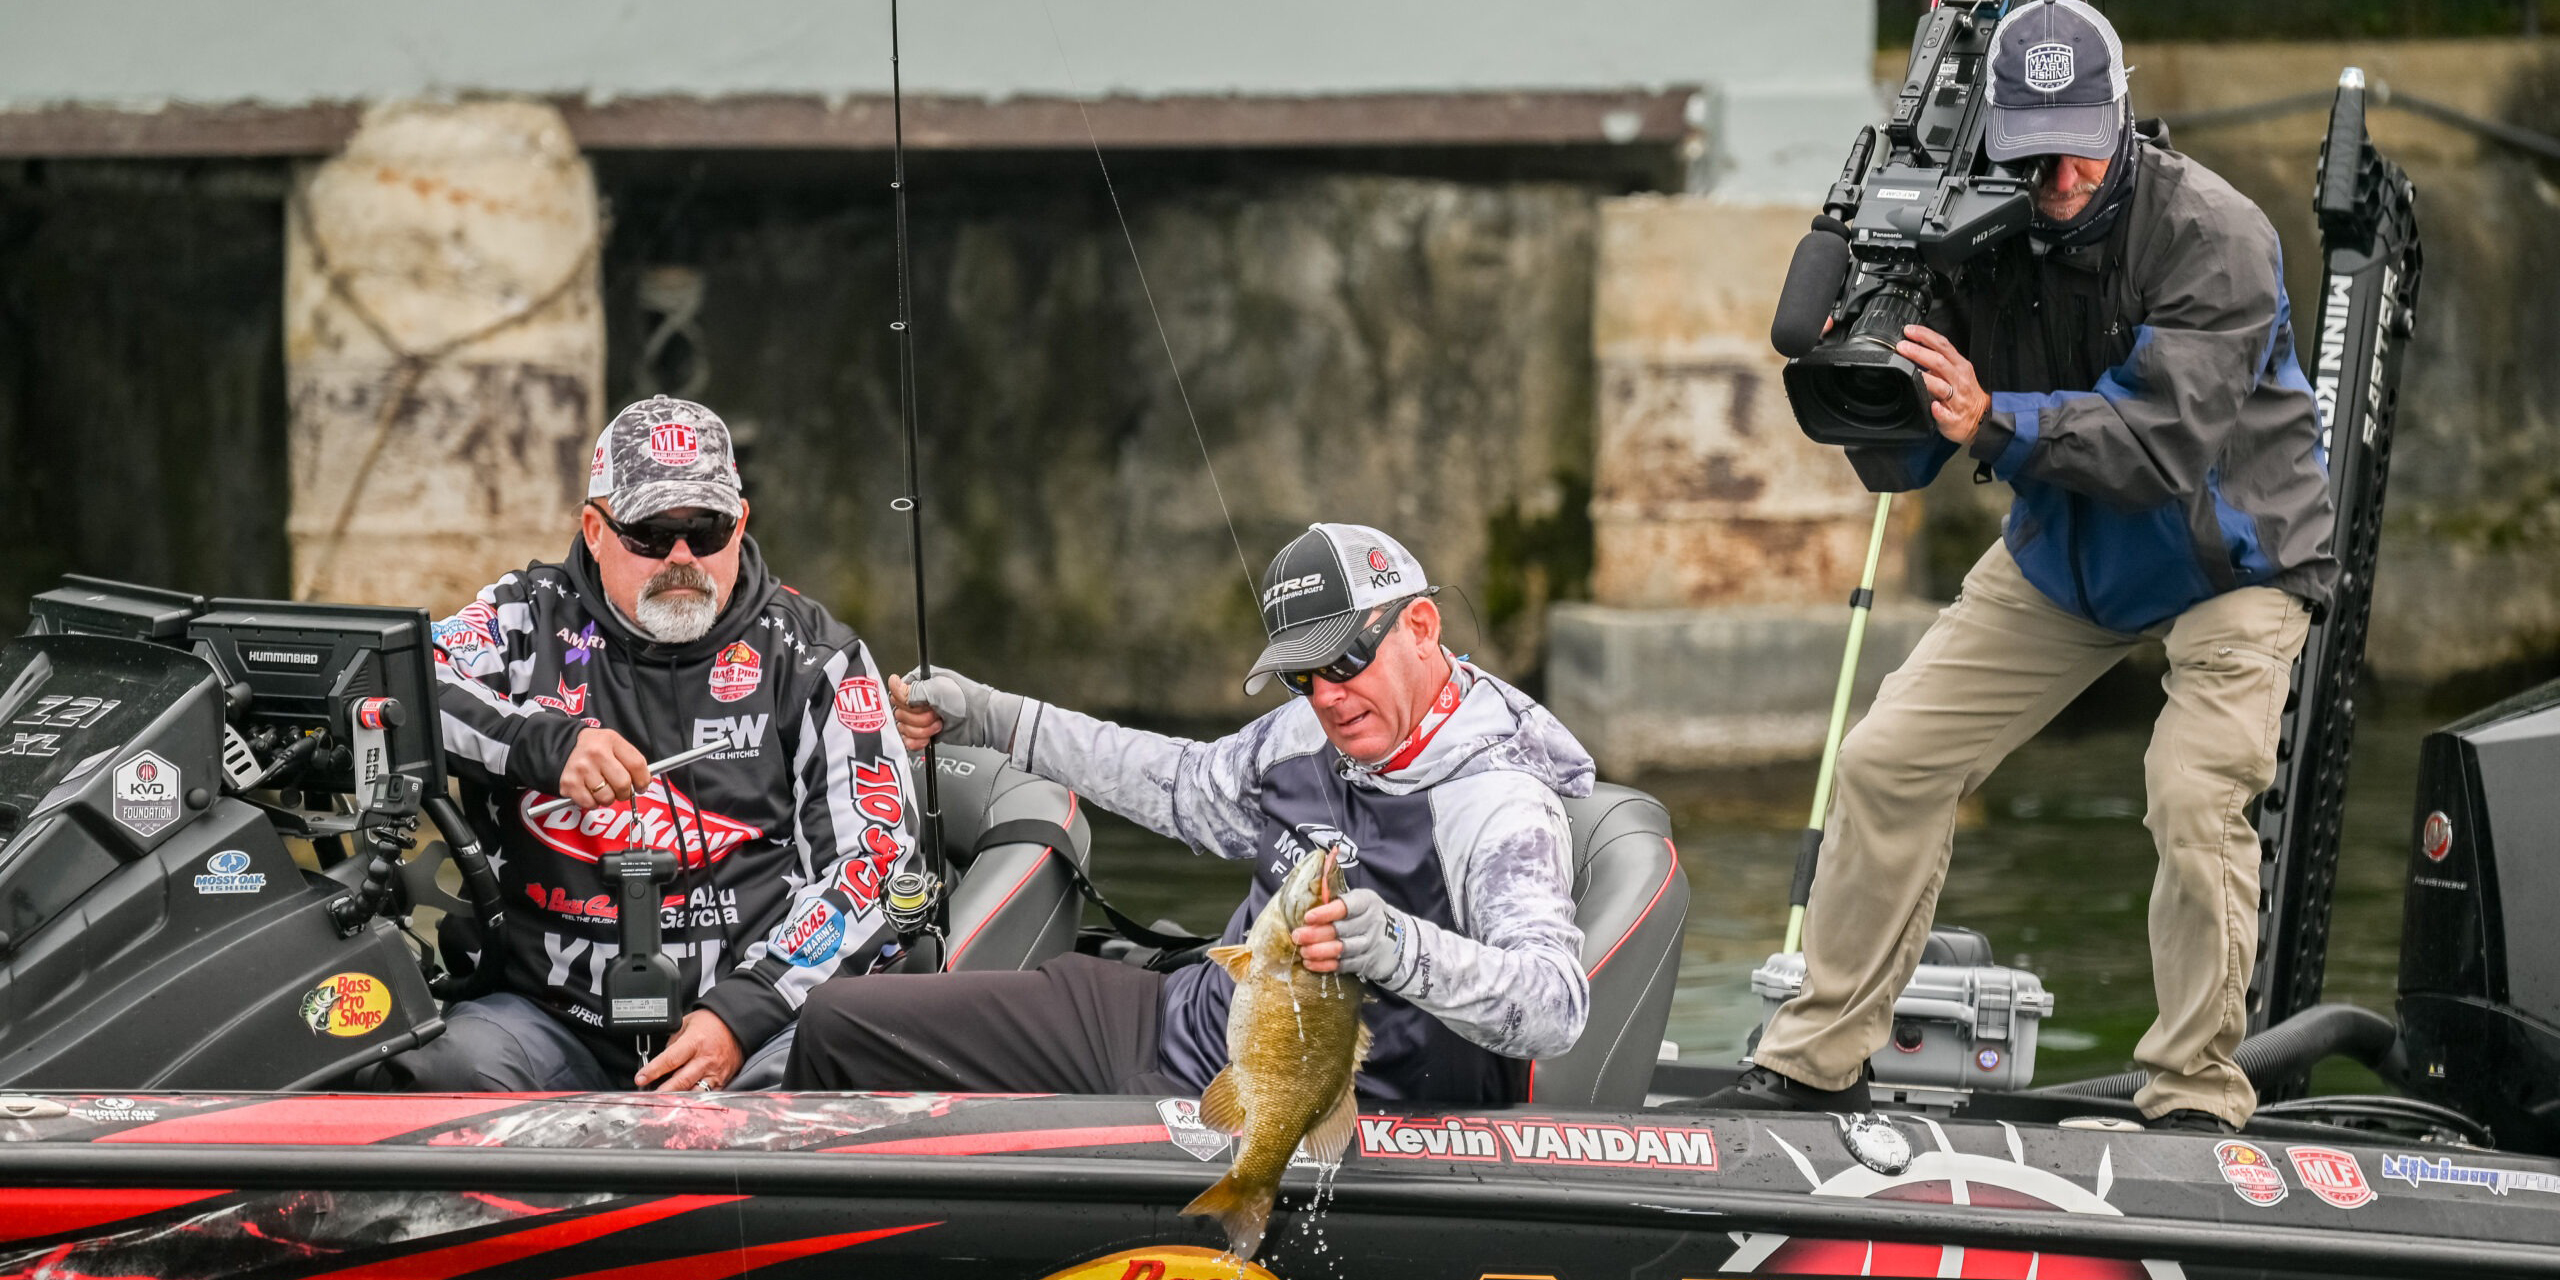 Metro & state: Kevin VanDam opens Bassmaster Classic in 12th